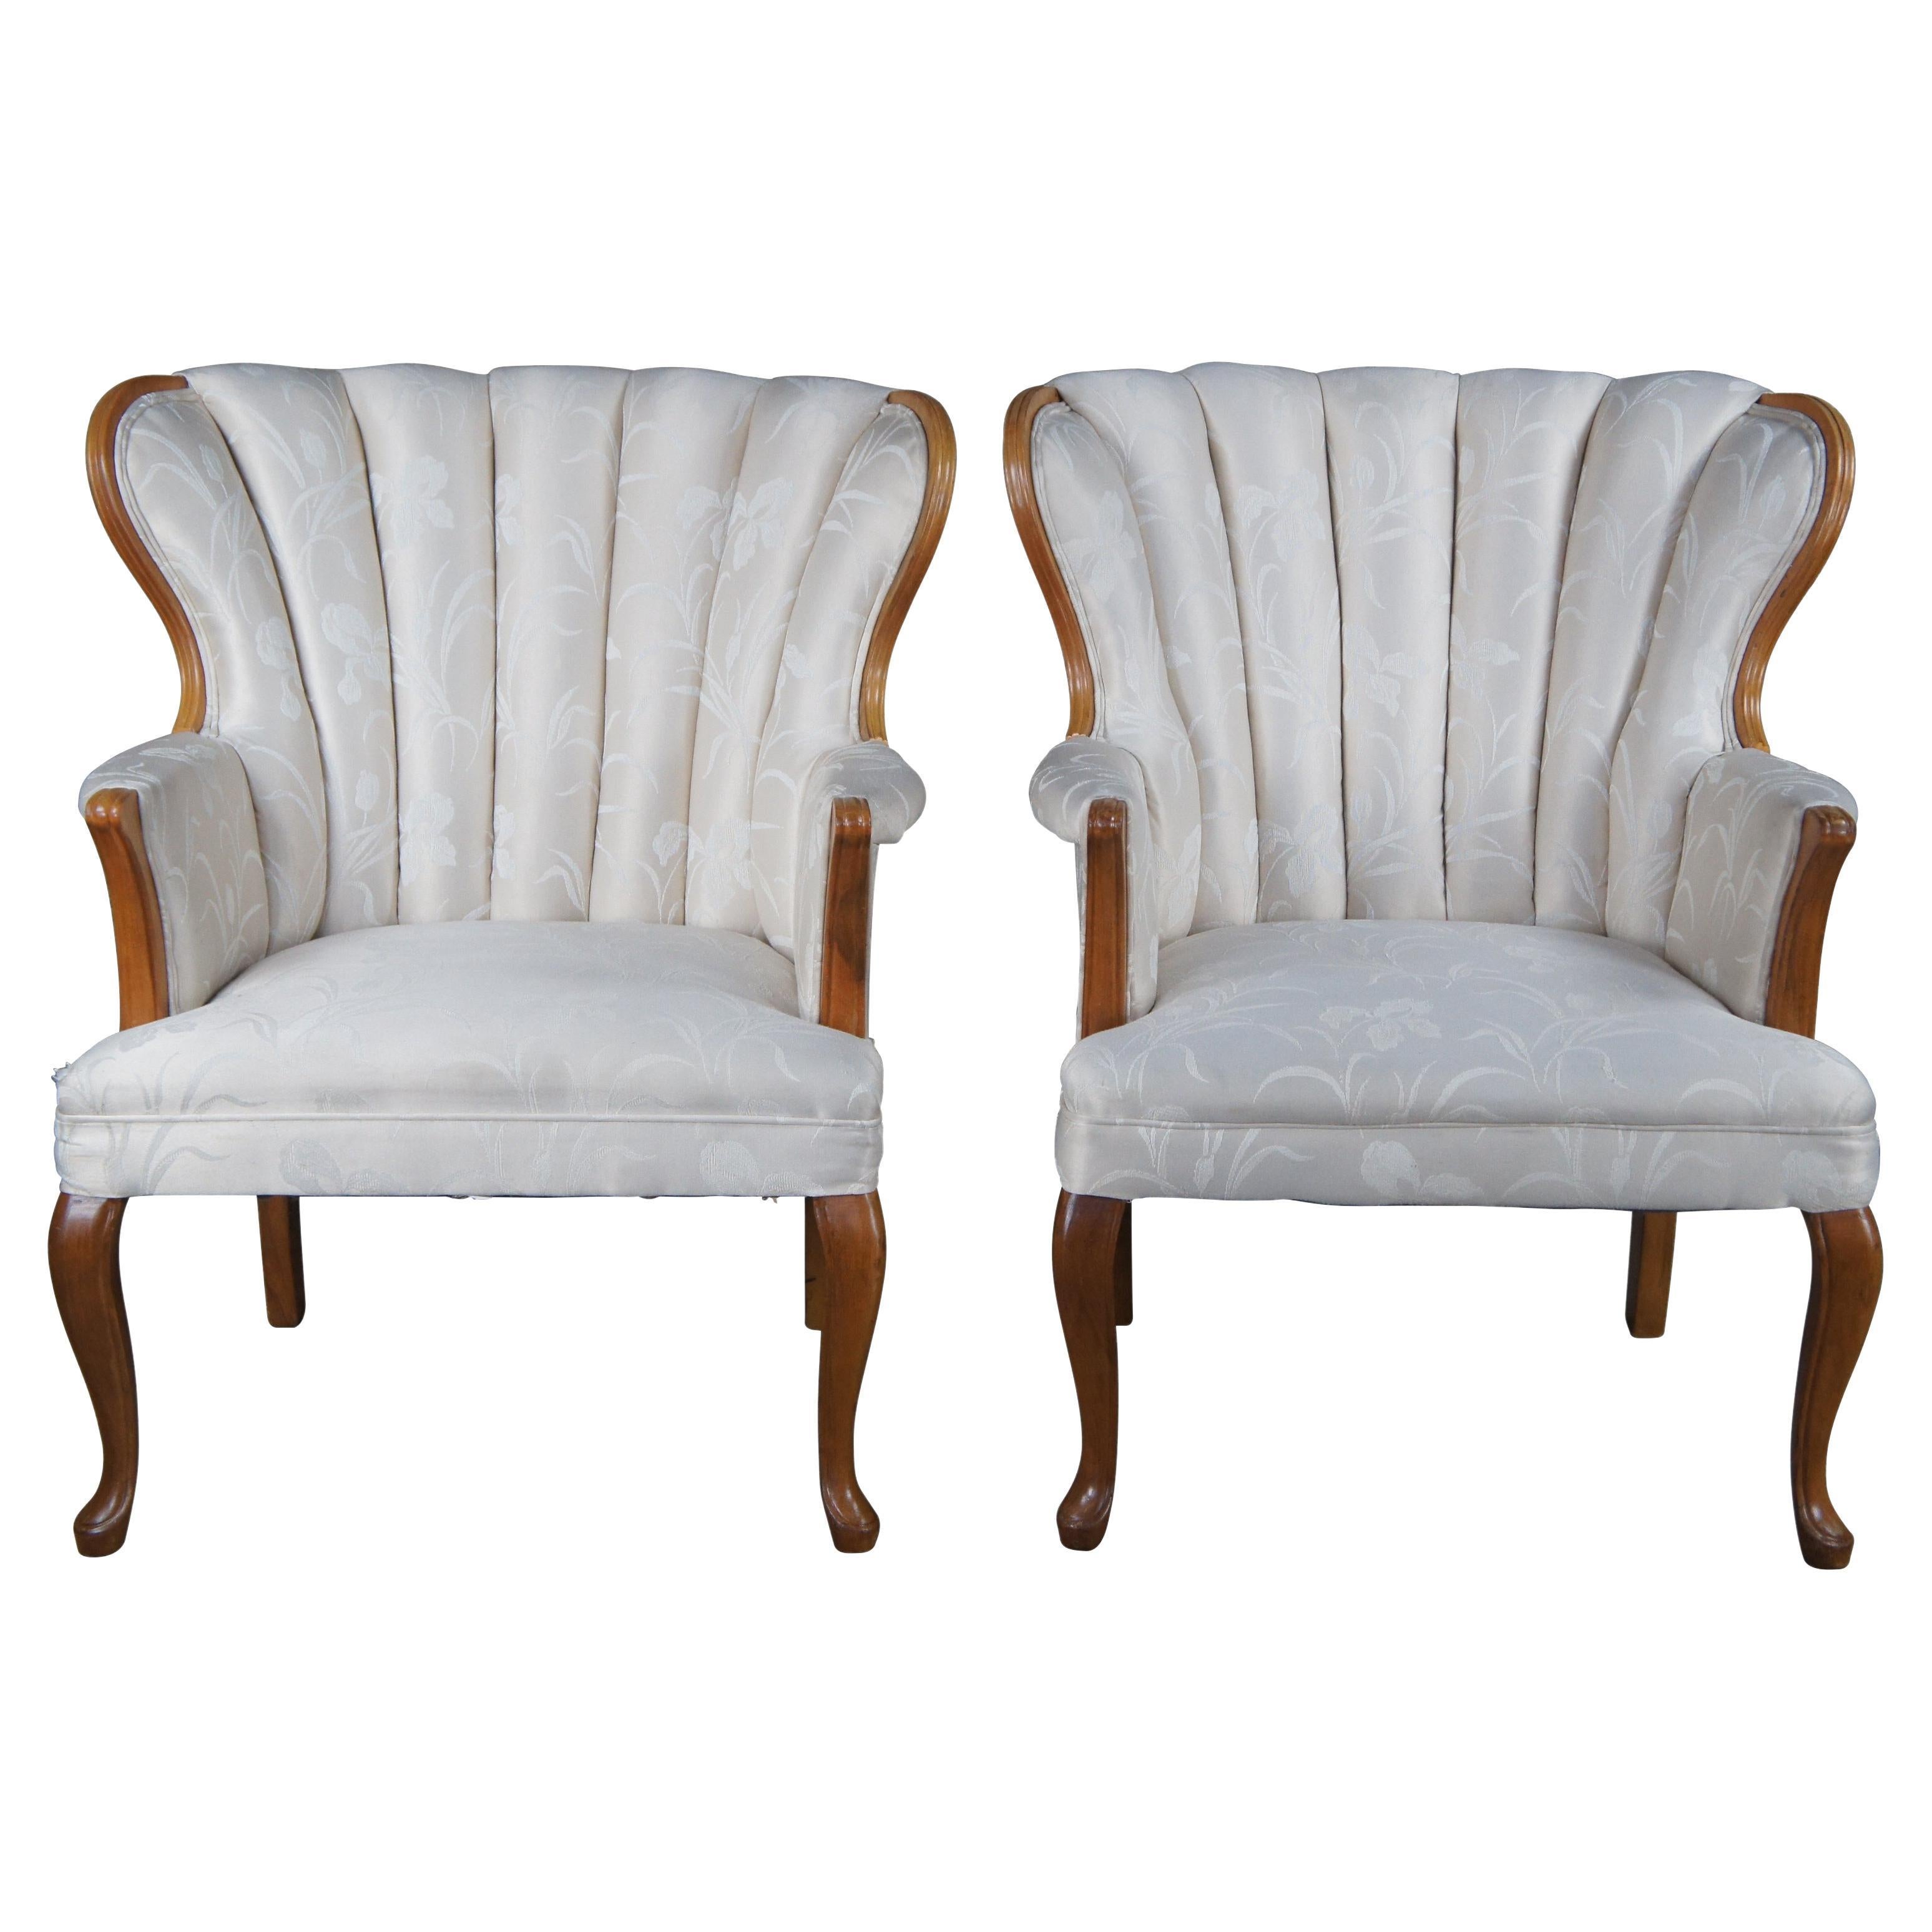 2 Vintage Queen Anne Mahogany Channel Back Upholstered Wingback Arm Chairs